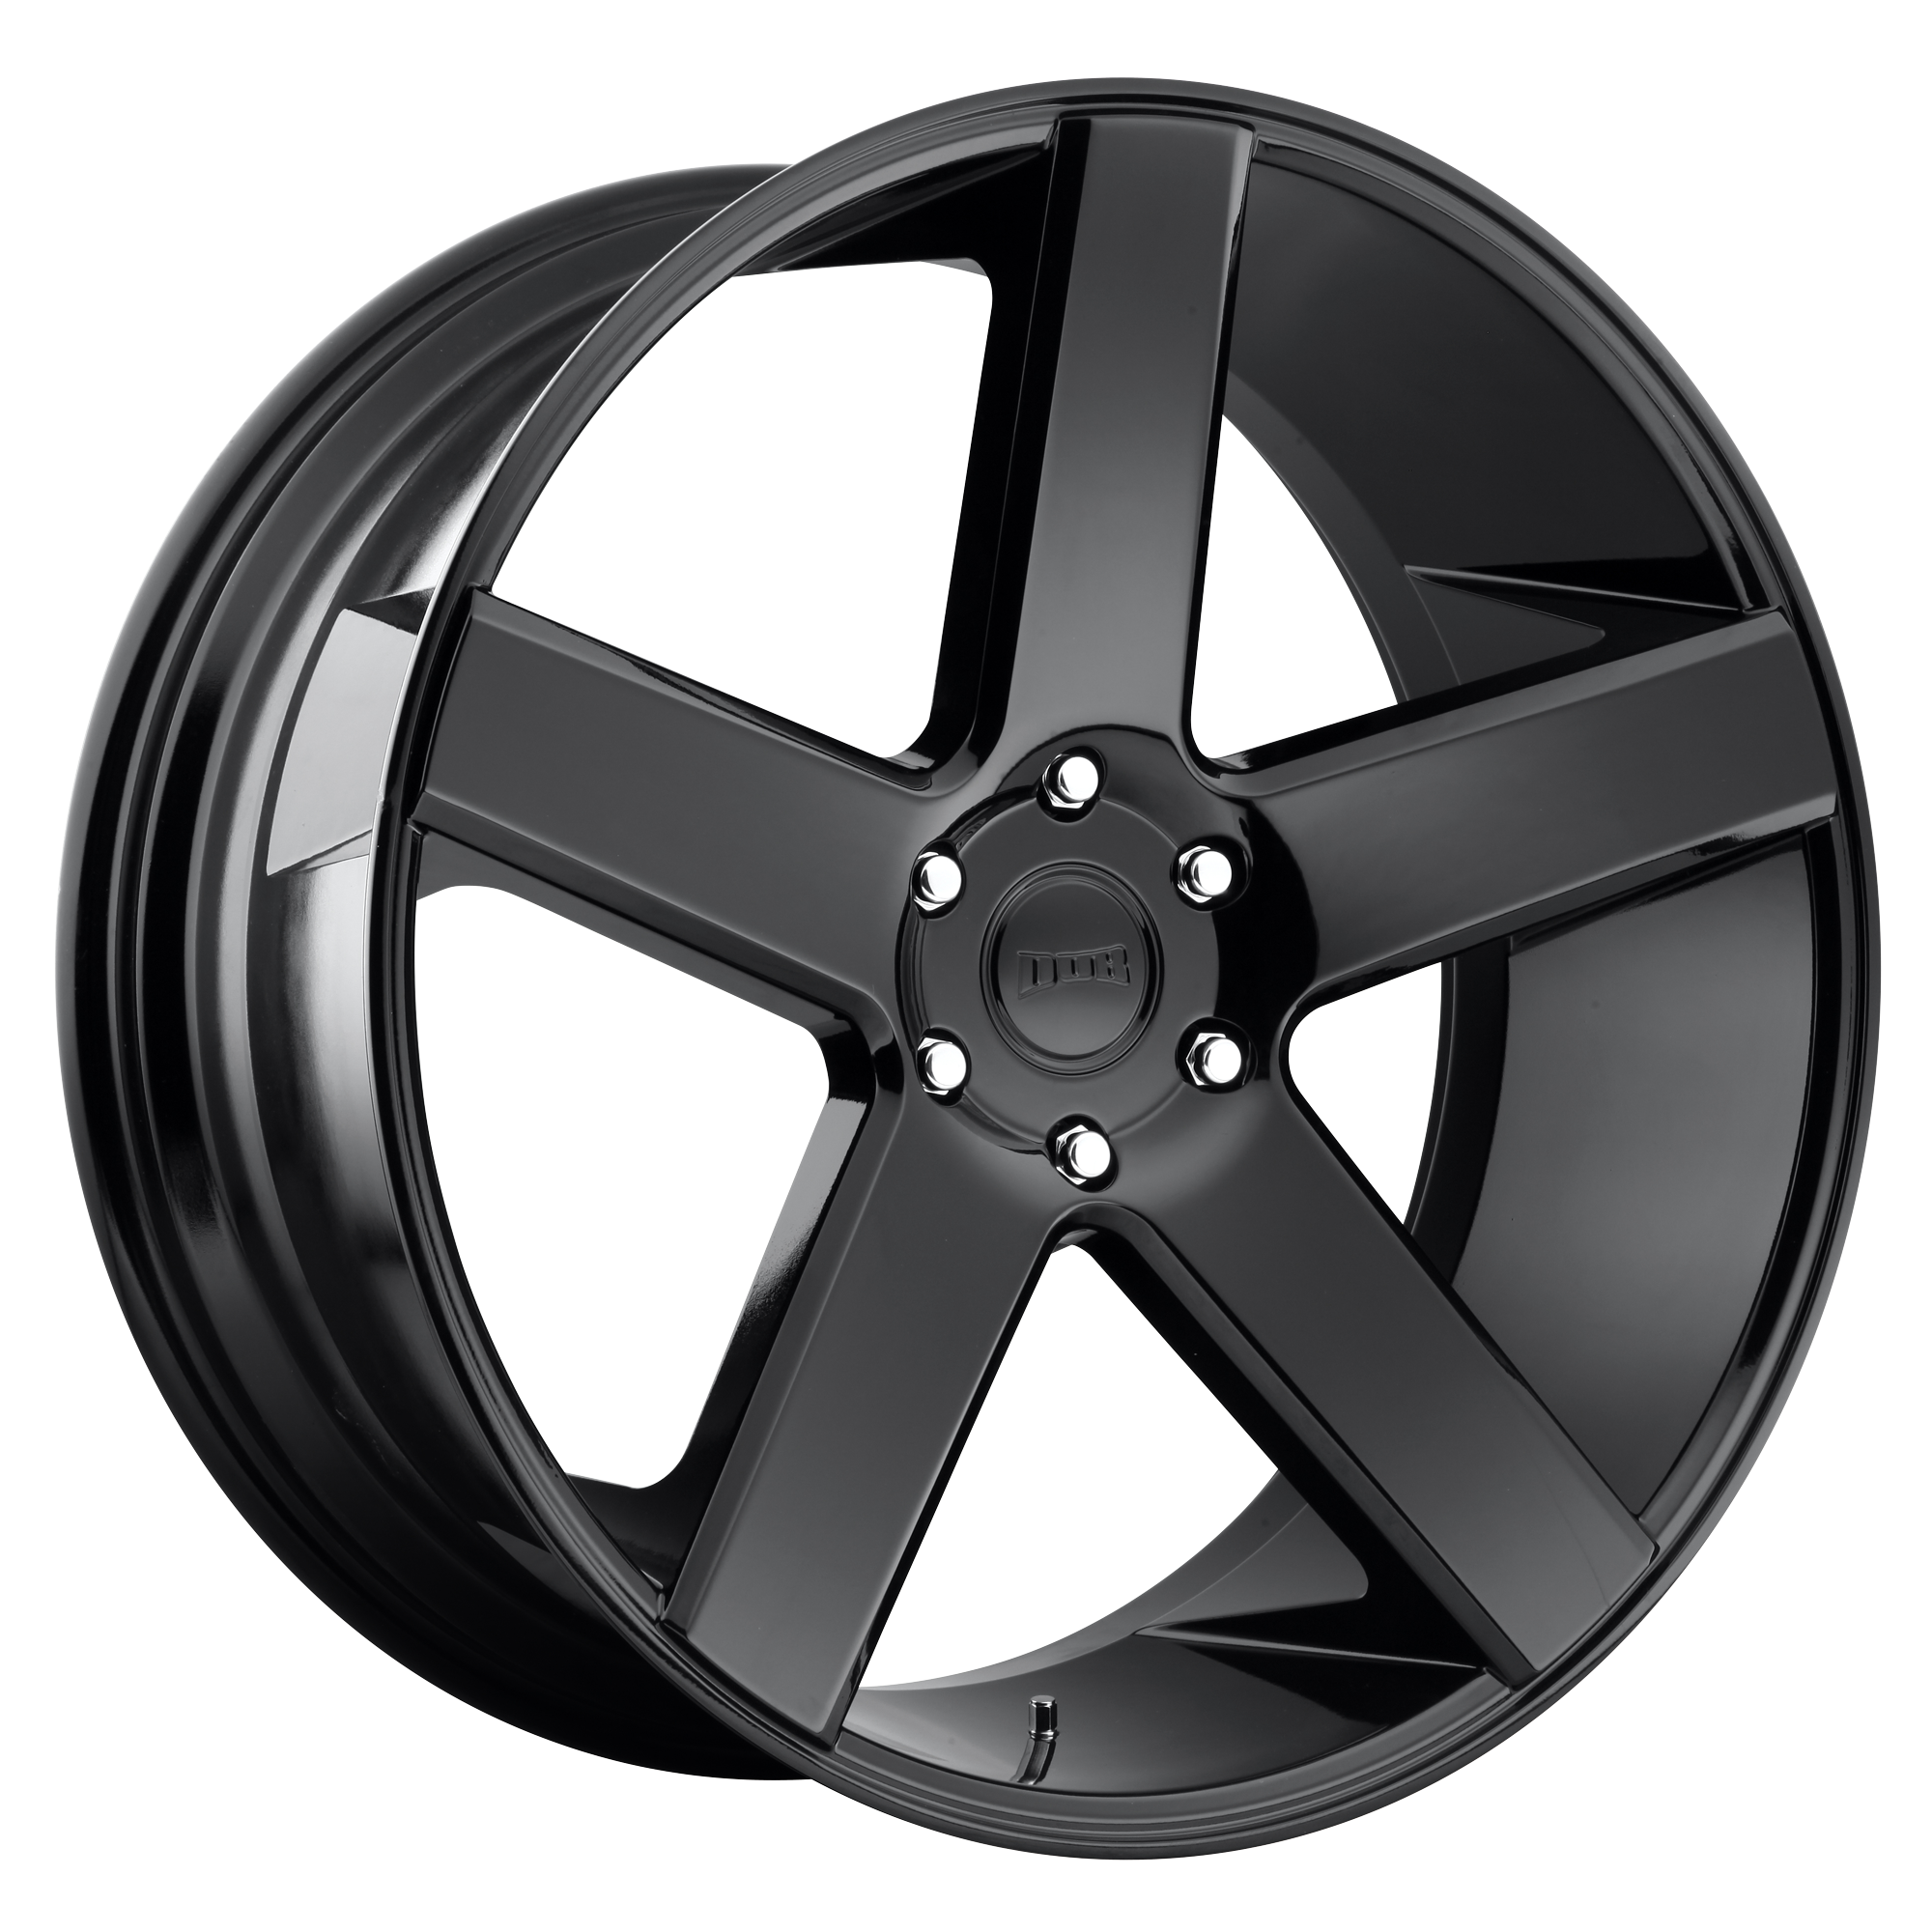 BALLER 26x10 5x127.00 GLOSS BLACK (11 mm) - Tires and Engine Performance